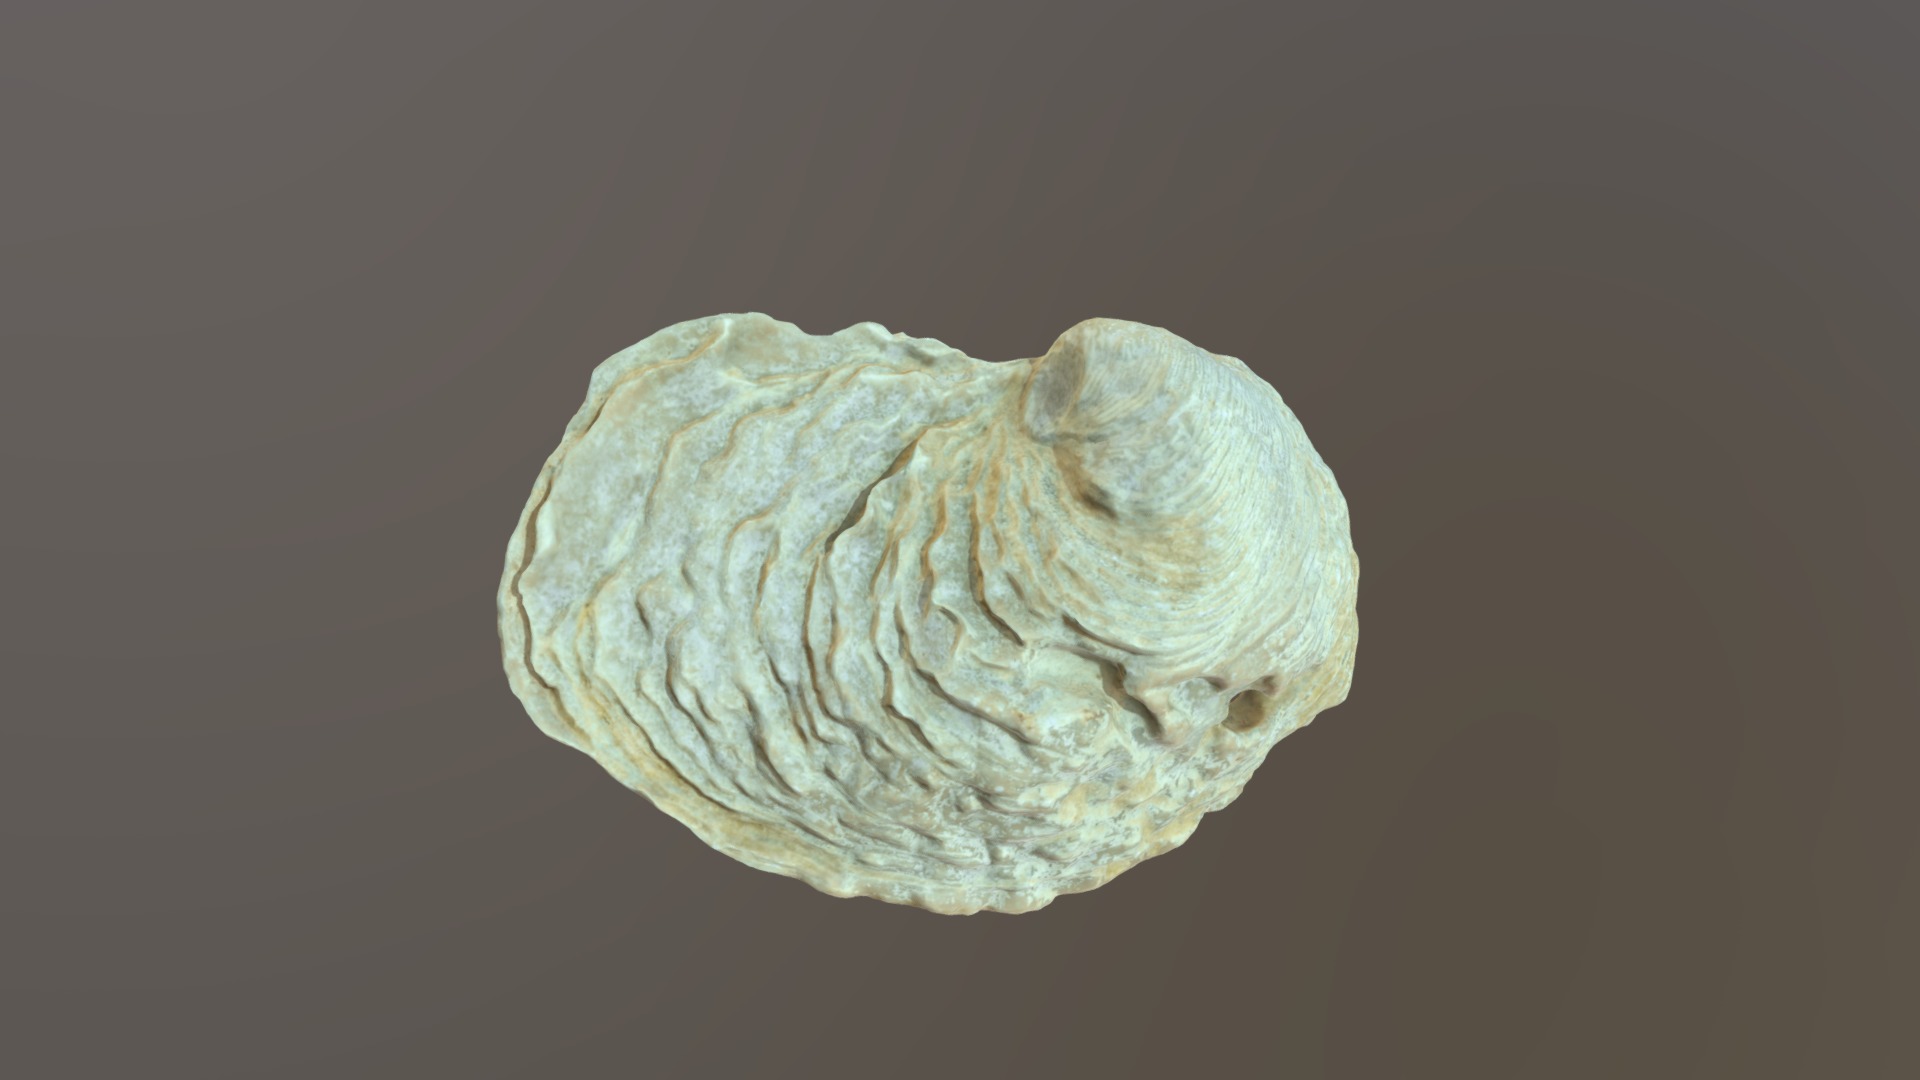 3D model Ilymatogyra arietina (upper valve) - This is a 3D model of the Ilymatogyra arietina (upper valve). The 3D model is about a close-up of a rock.